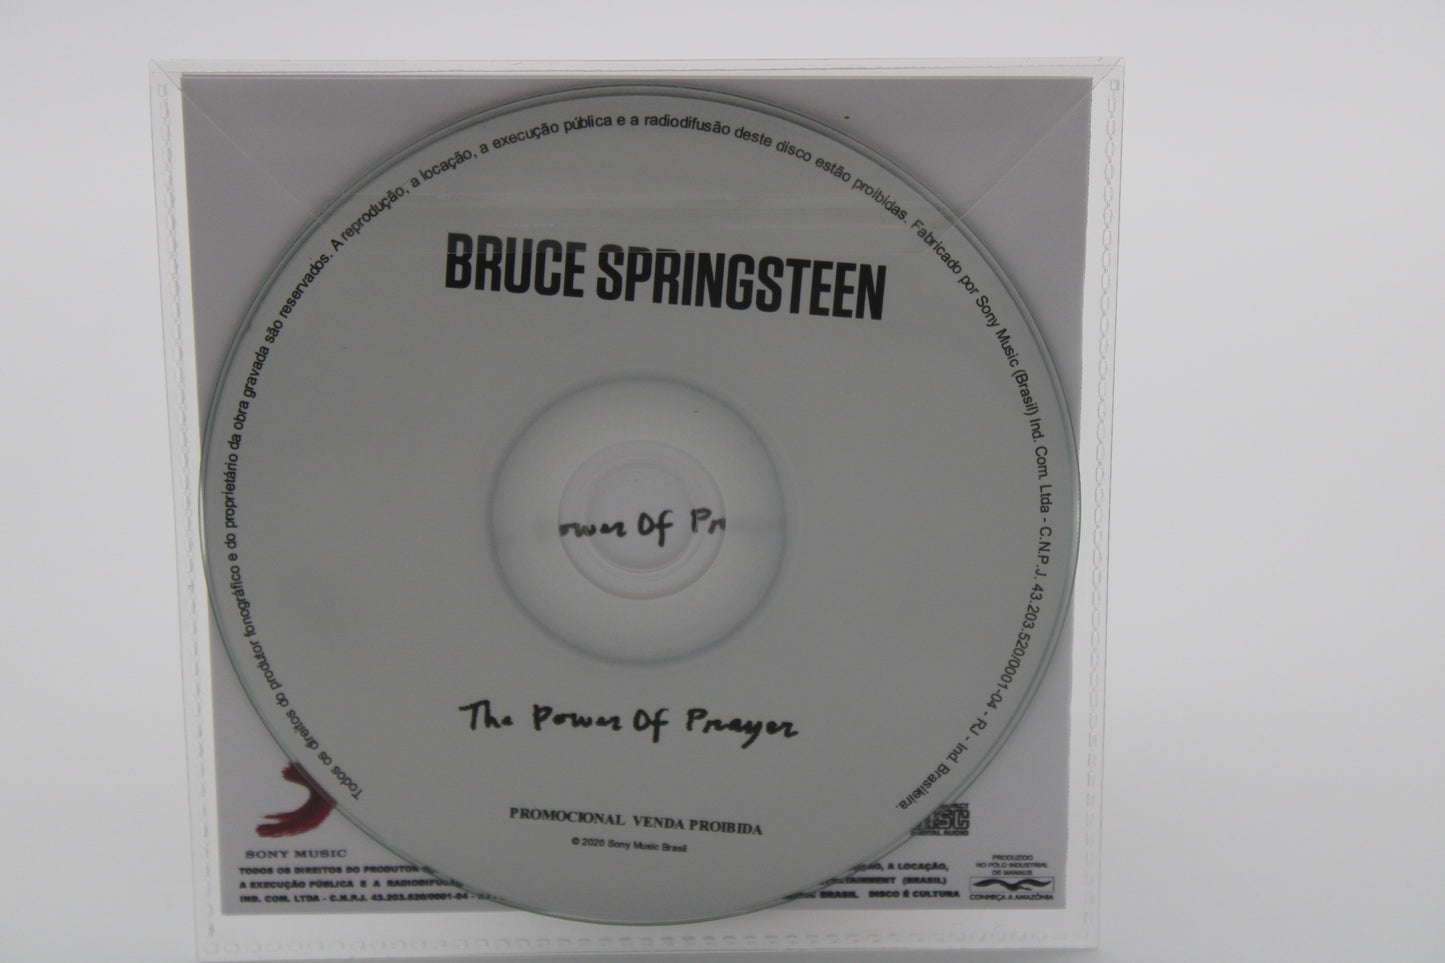 Bruce Springsteen - The Power of Prayer - Promotional CD/Single - Import Collectible